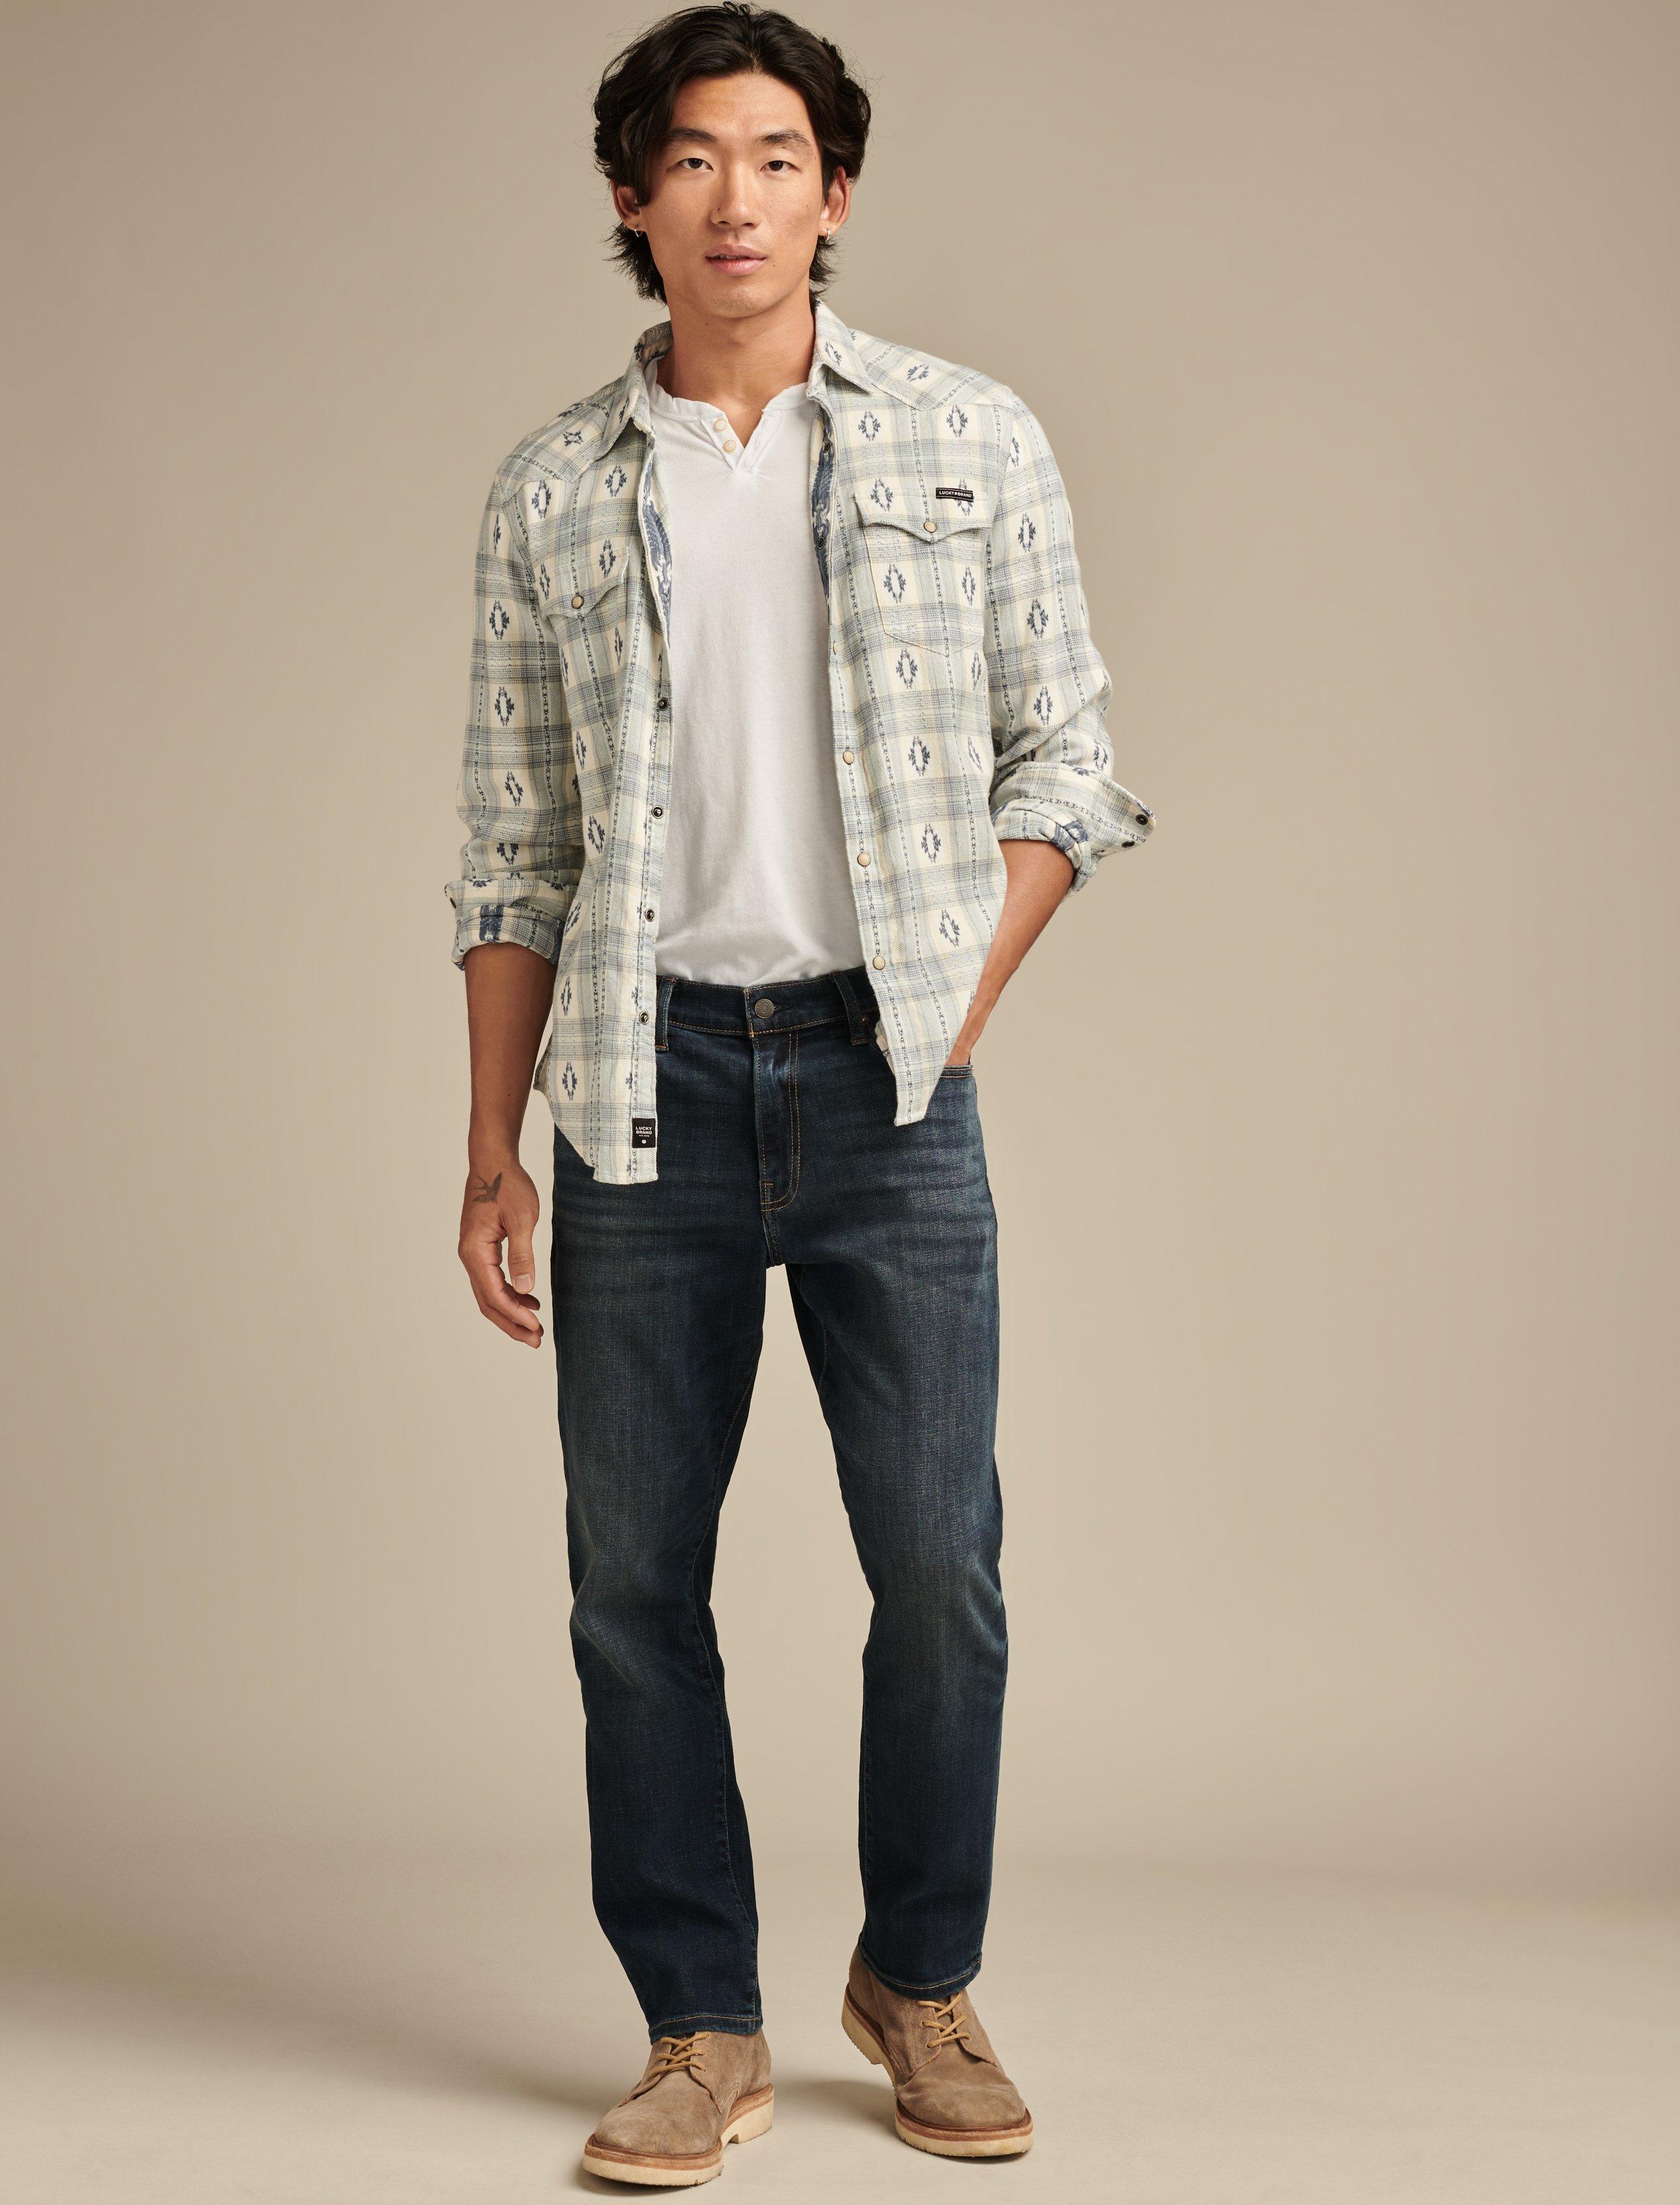 lucky brand white jeans mens